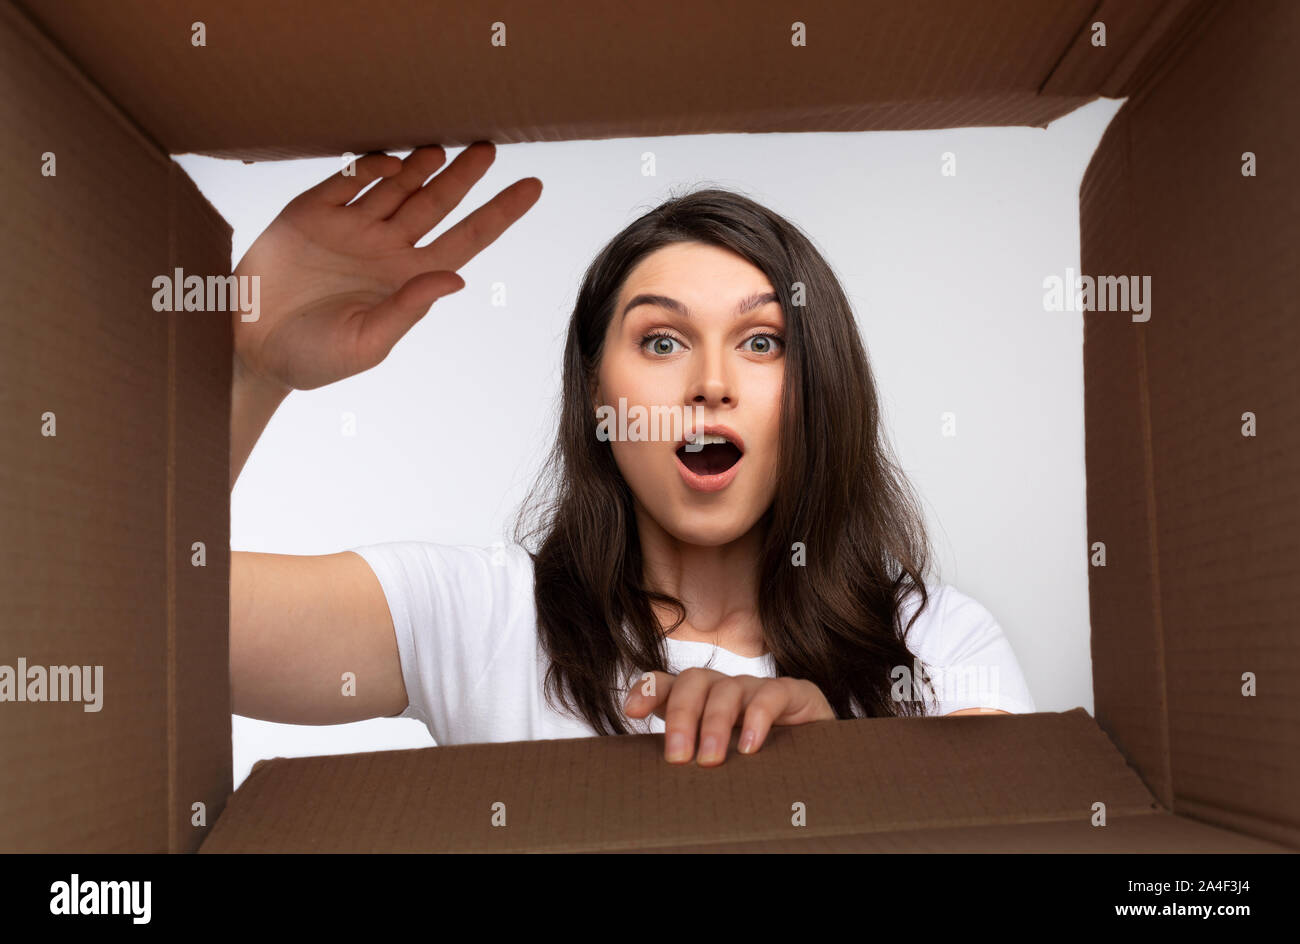 Excited Lady Looking Into Empty Box, Bottom View Stock Photo